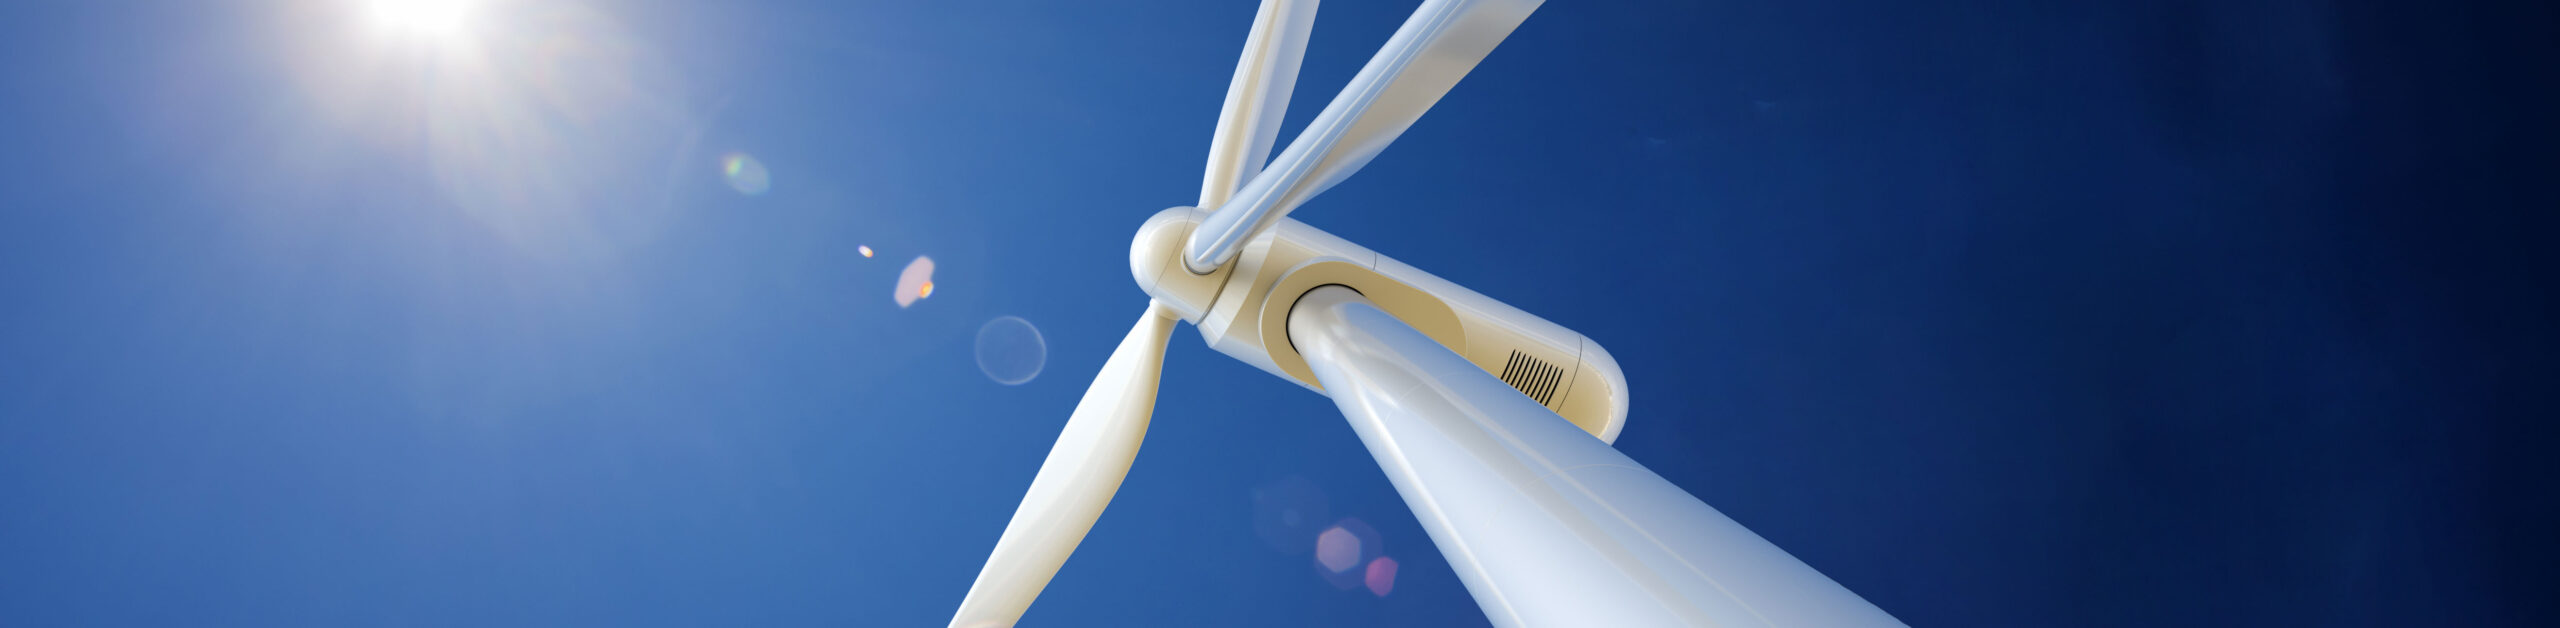 Close-up shot of a white wind turbine in the foreground with a navy blue sky in the background with snippet of the sun shining in on the wind turbine